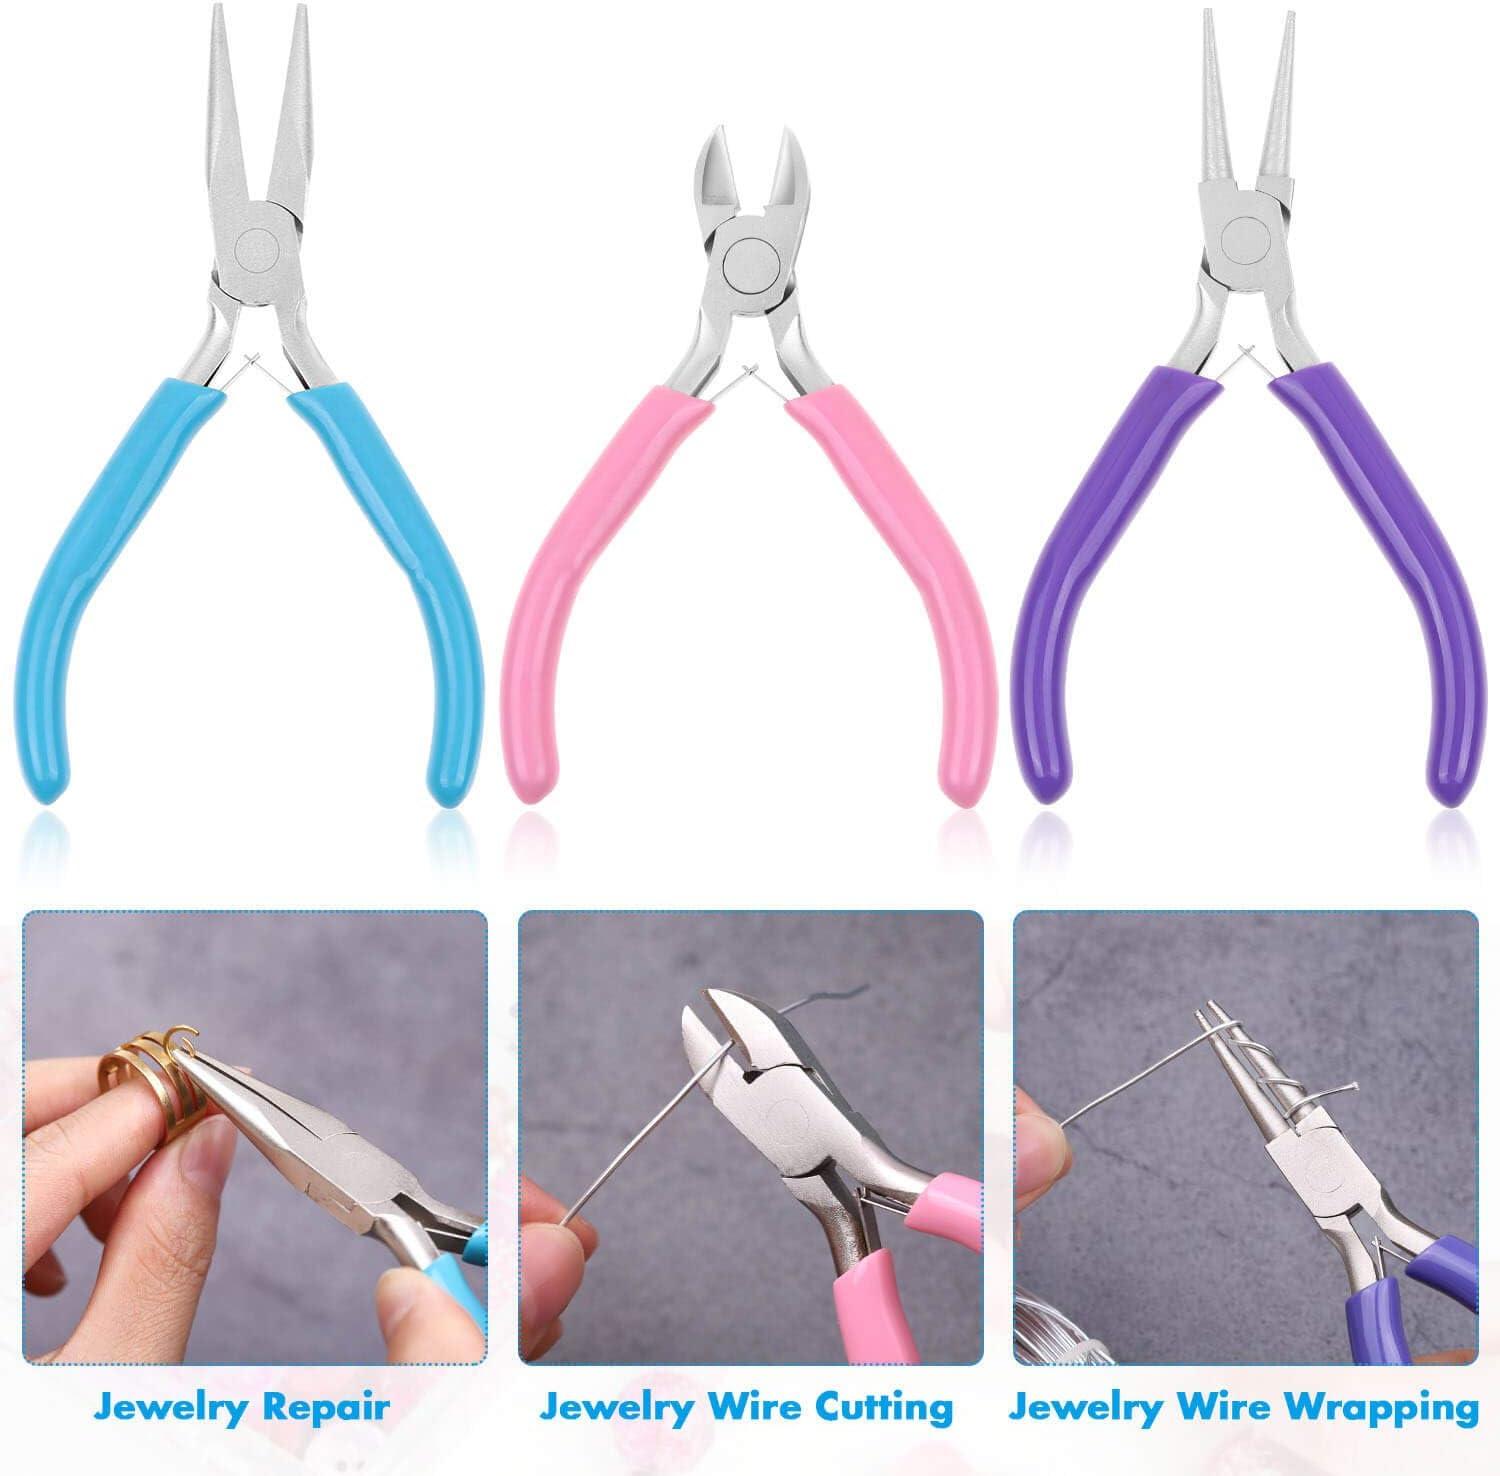  11 Pcs DIY Jewelry Making Tool Sets and Jewelry Repairs Tools,  Include Pliers Tweezers Ring Crochet Needle Kit Accessories for Necklace  DIY, Crafting, Fixing, Cleaning : Arts, Crafts & Sewing